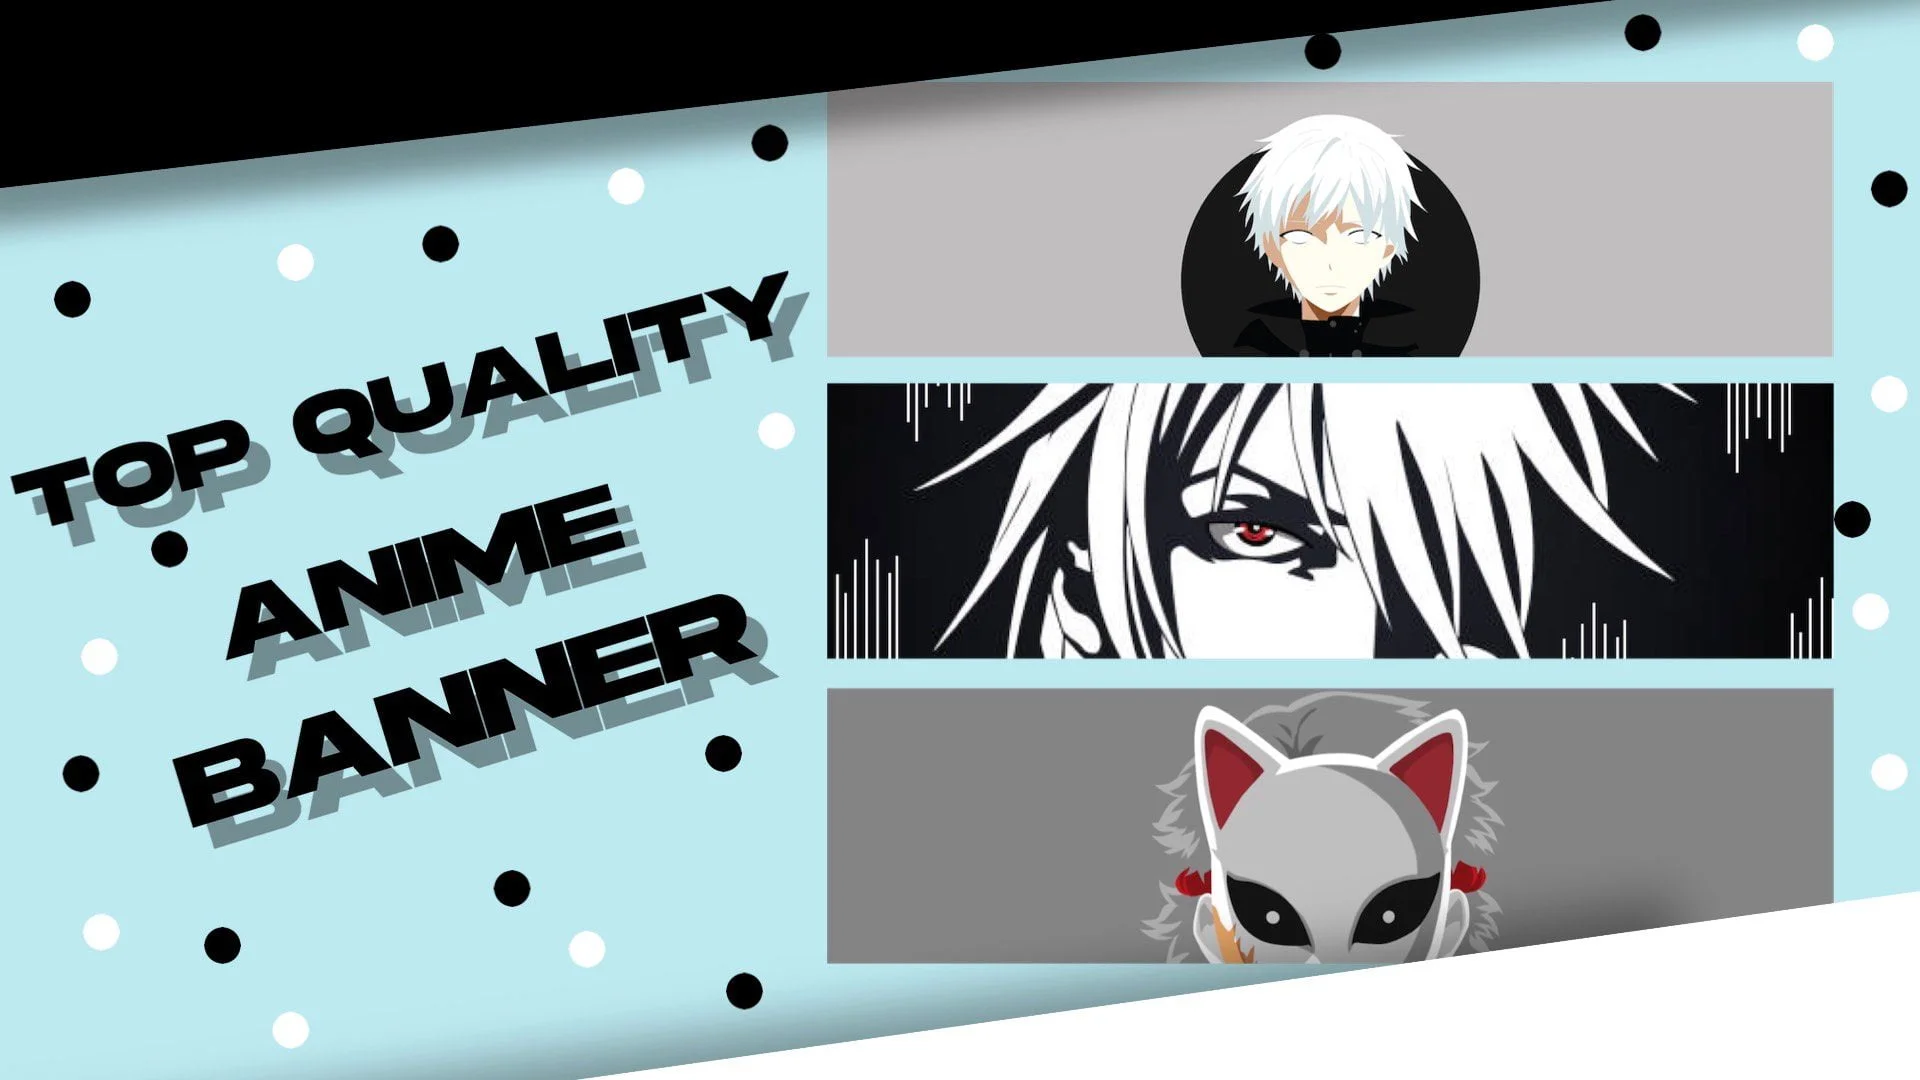 Create cool and playful anime or vtuber banners for your, twitch, youtube,  kick by Mhagi27 | Fiverr